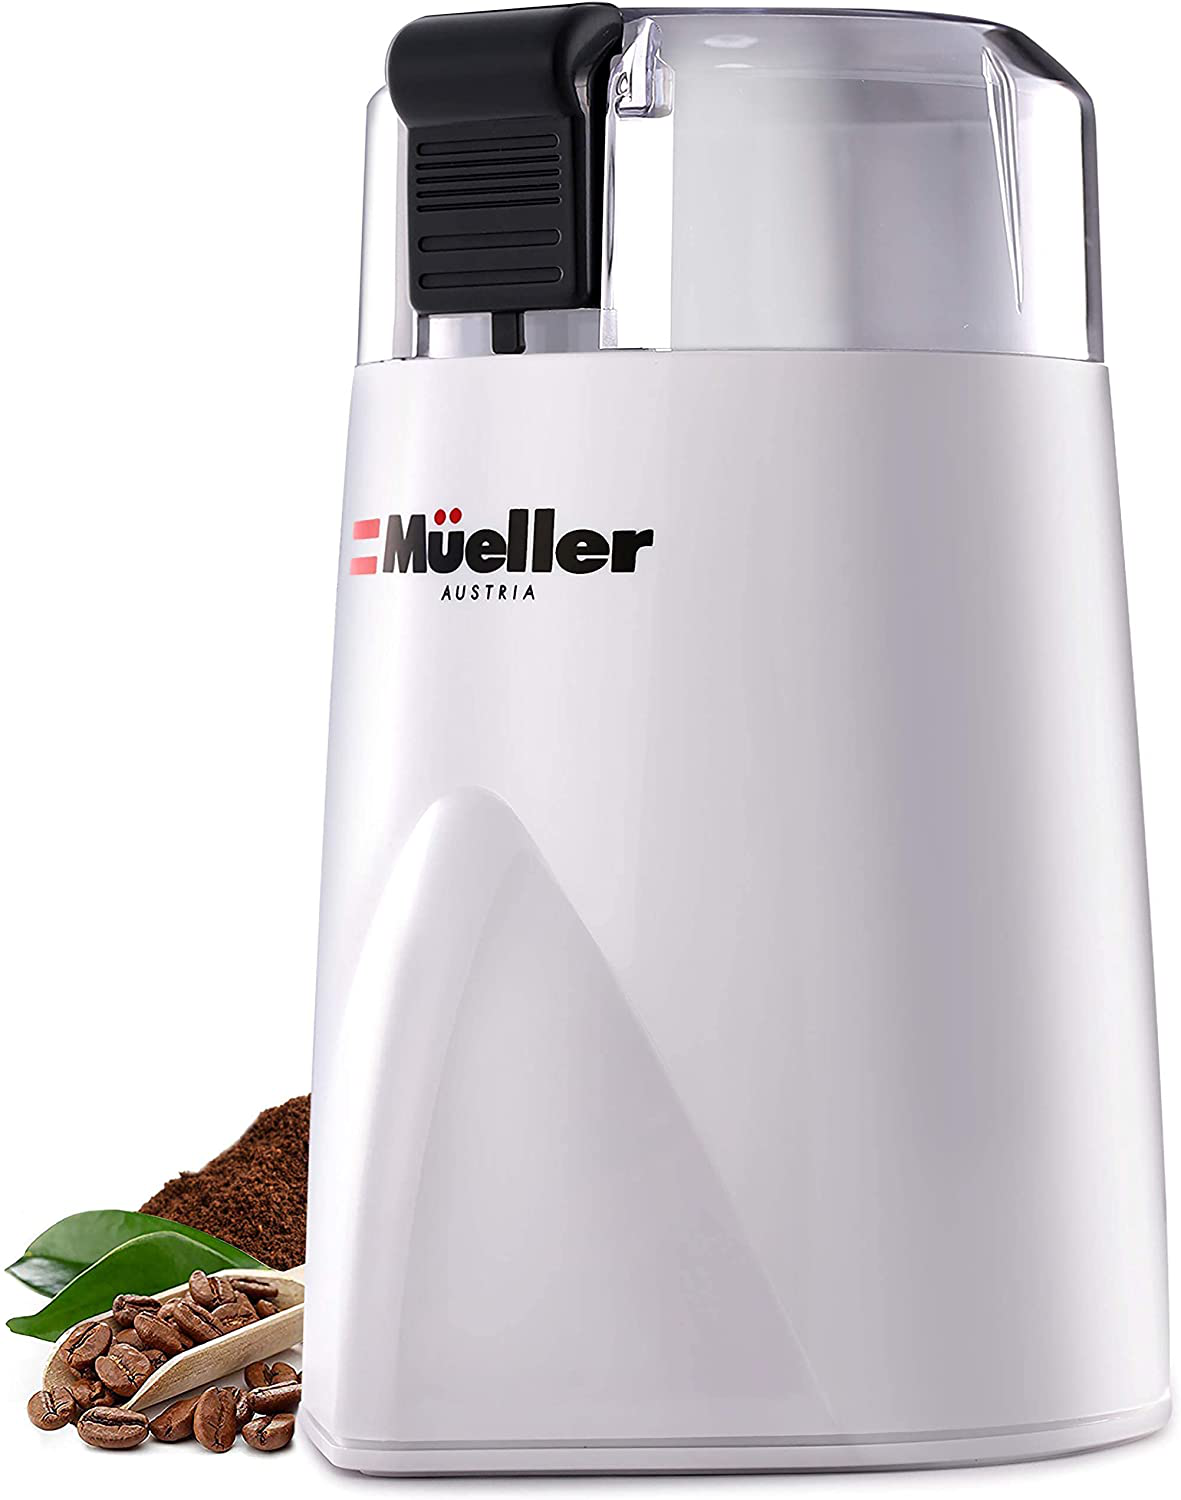 Mueller Hypergrind Precision Electric Spice/Coffee Grinder Mill with Large Grinding Capacity and Powerful Motor Also for Spices, Herbs, Nuts, Grains